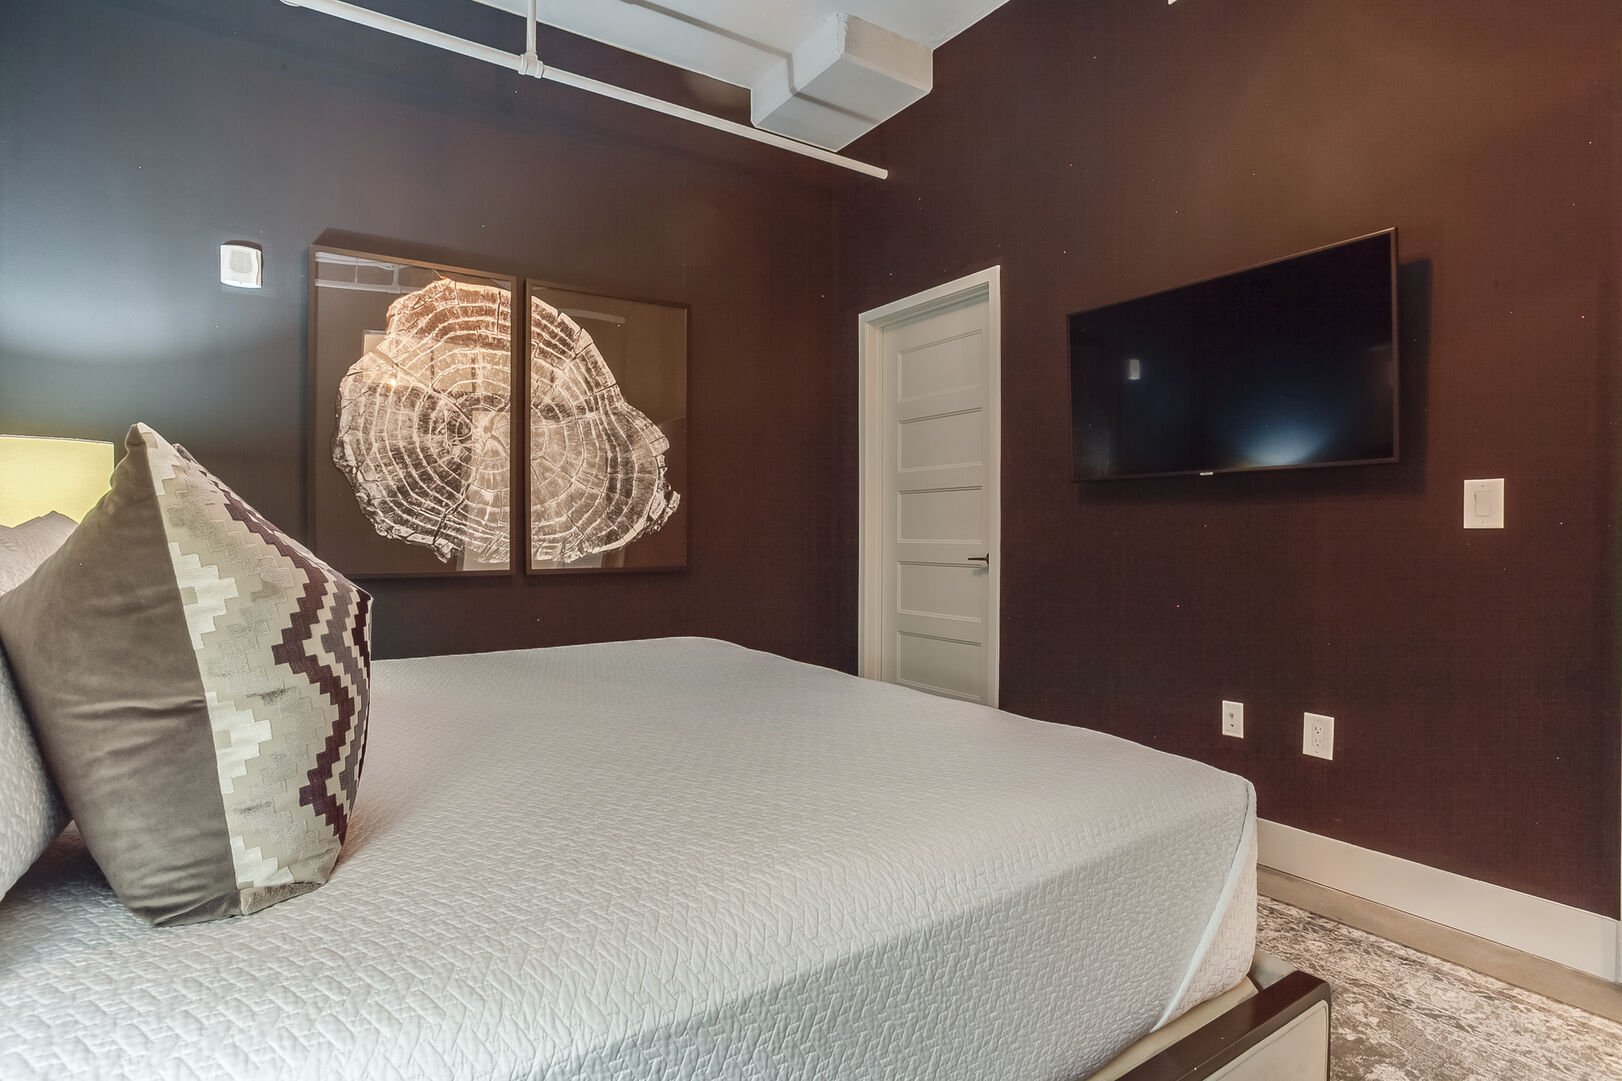 A picture of the bed and wall-mounted TV in the Master Bedroom.